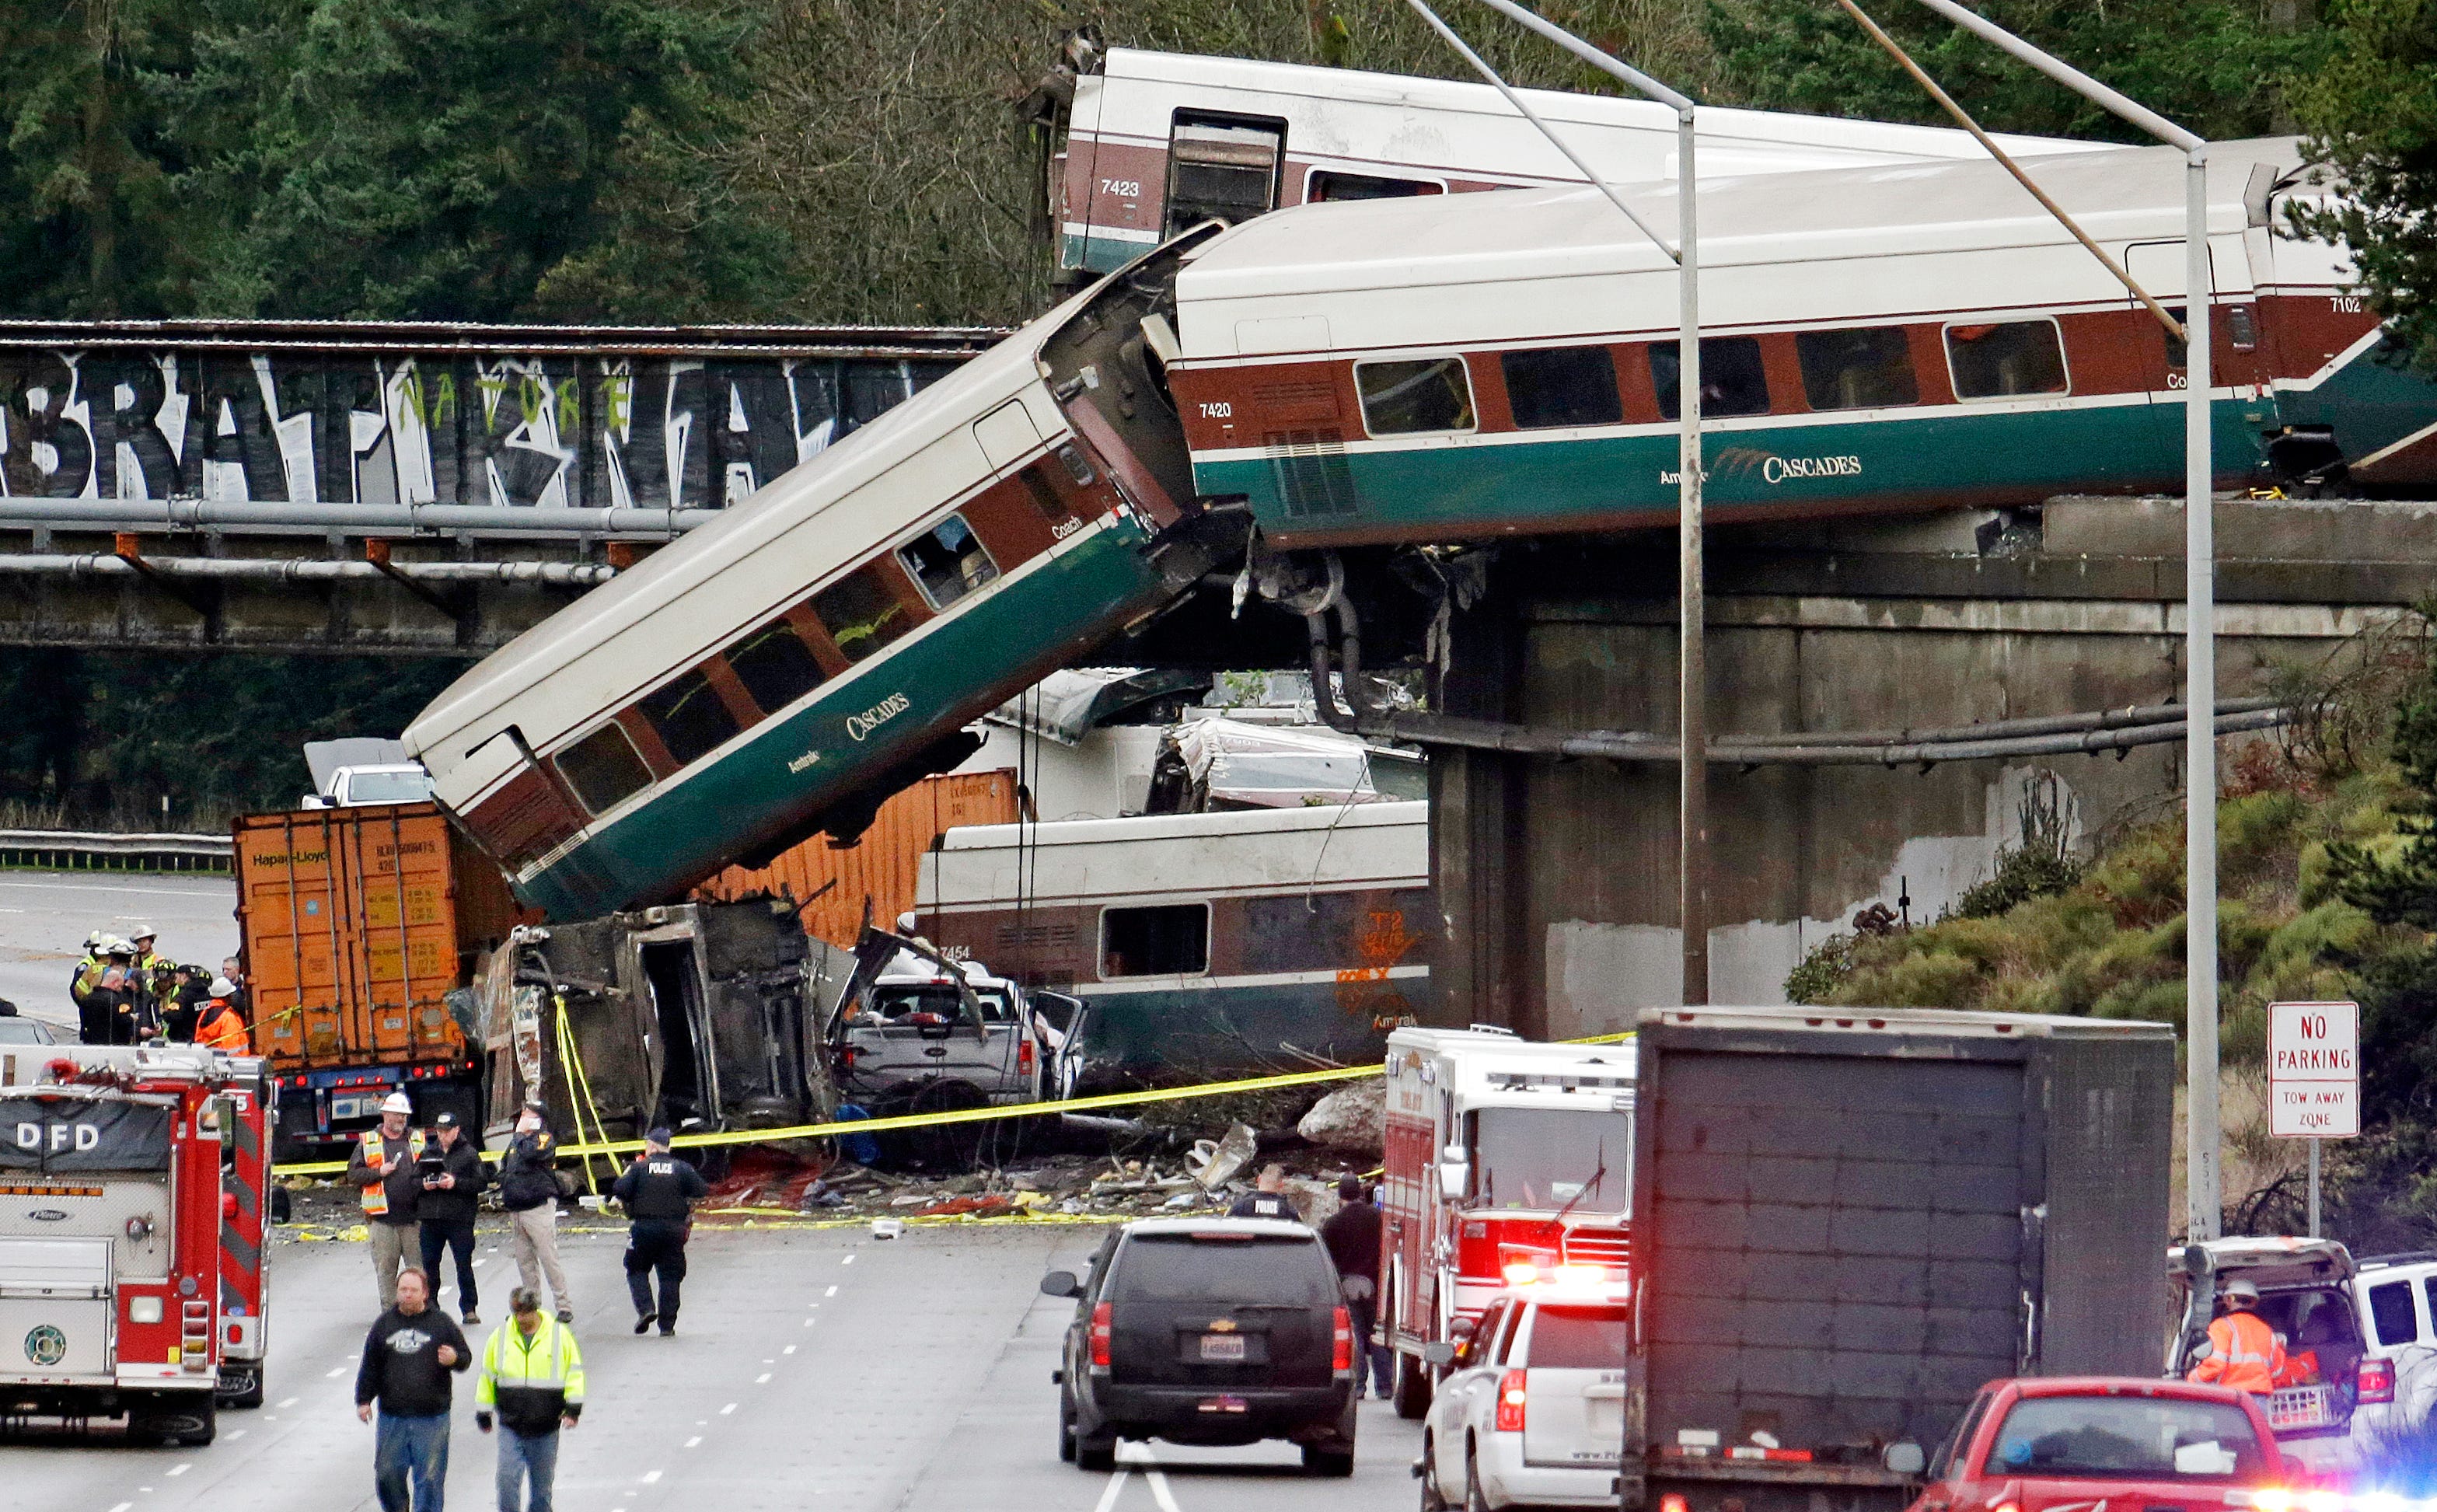 &lsquo;Crumpling and crashing and screaming&rsquo;: What it was like on board Washington&rsquo;s derailed Amtrak train